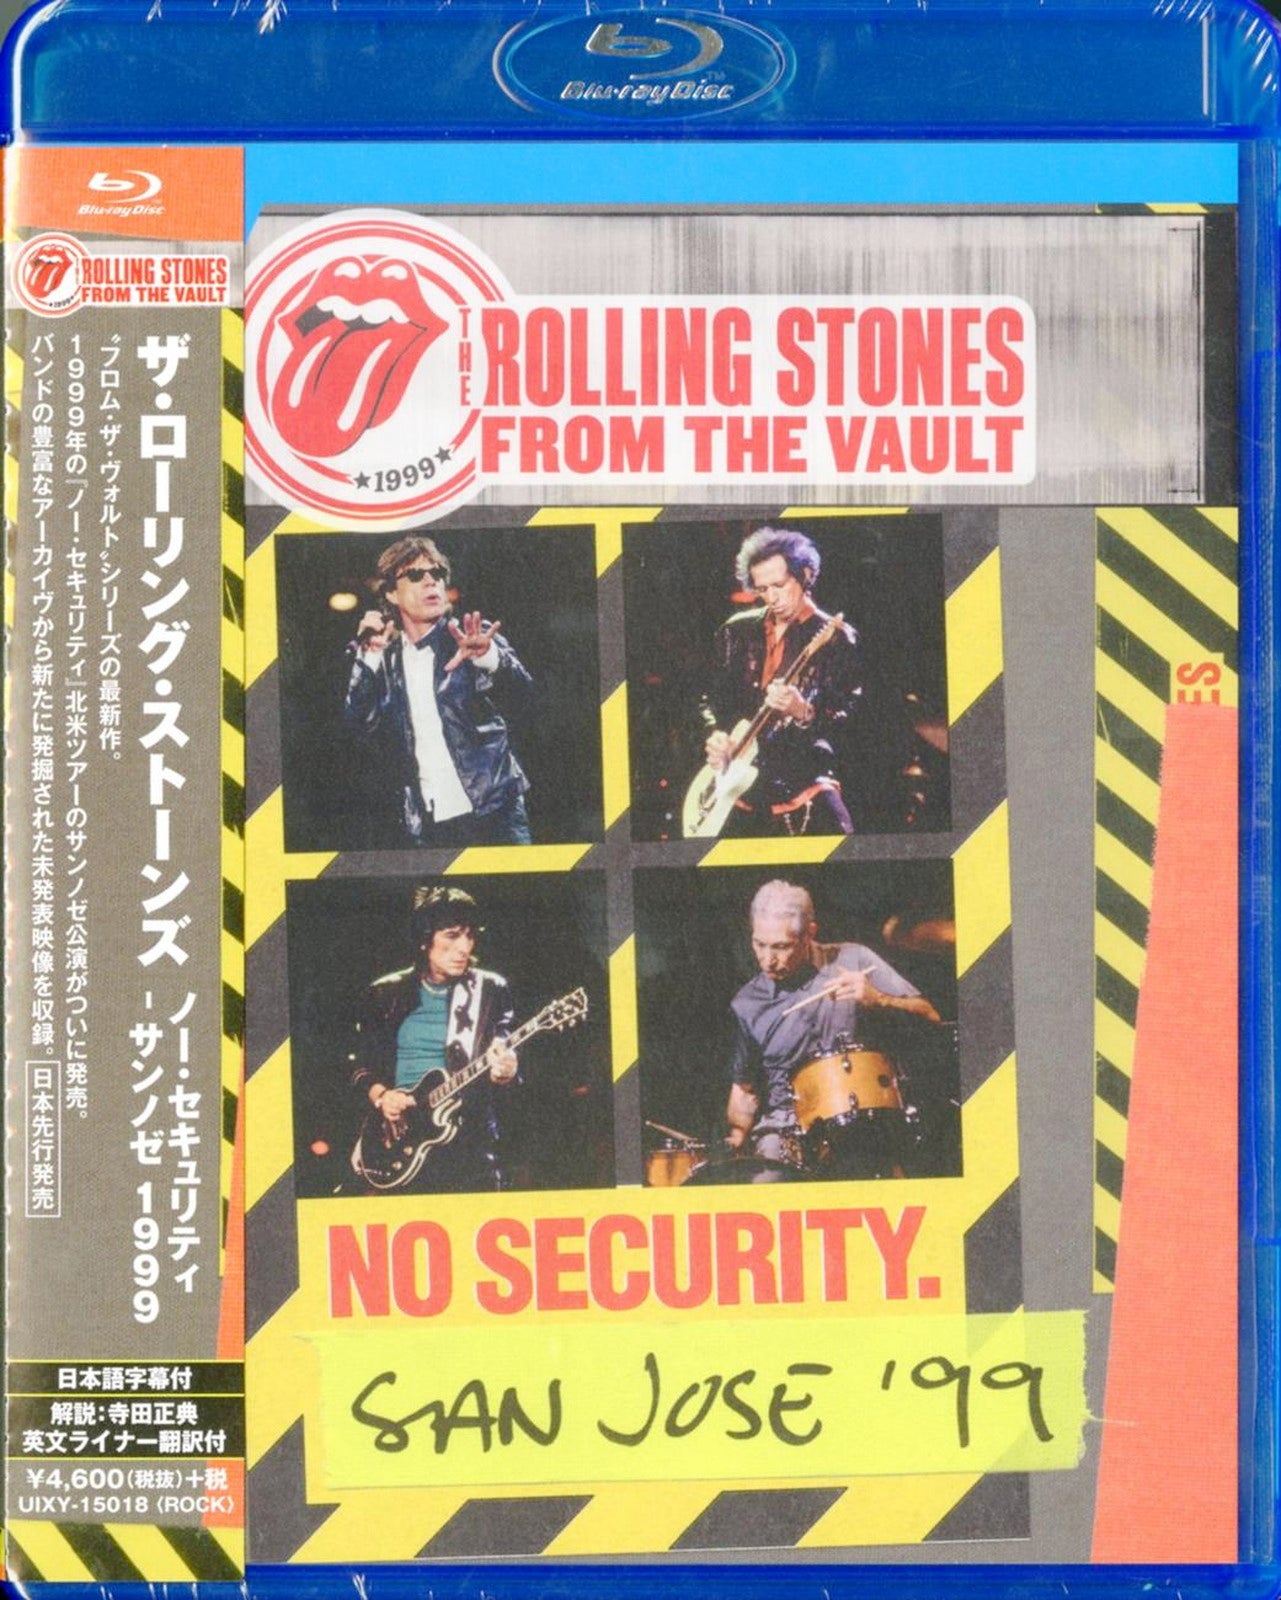 The Rolling Stones - From The Vault: No Secutiry - San Jose 1999 - Blu-ray